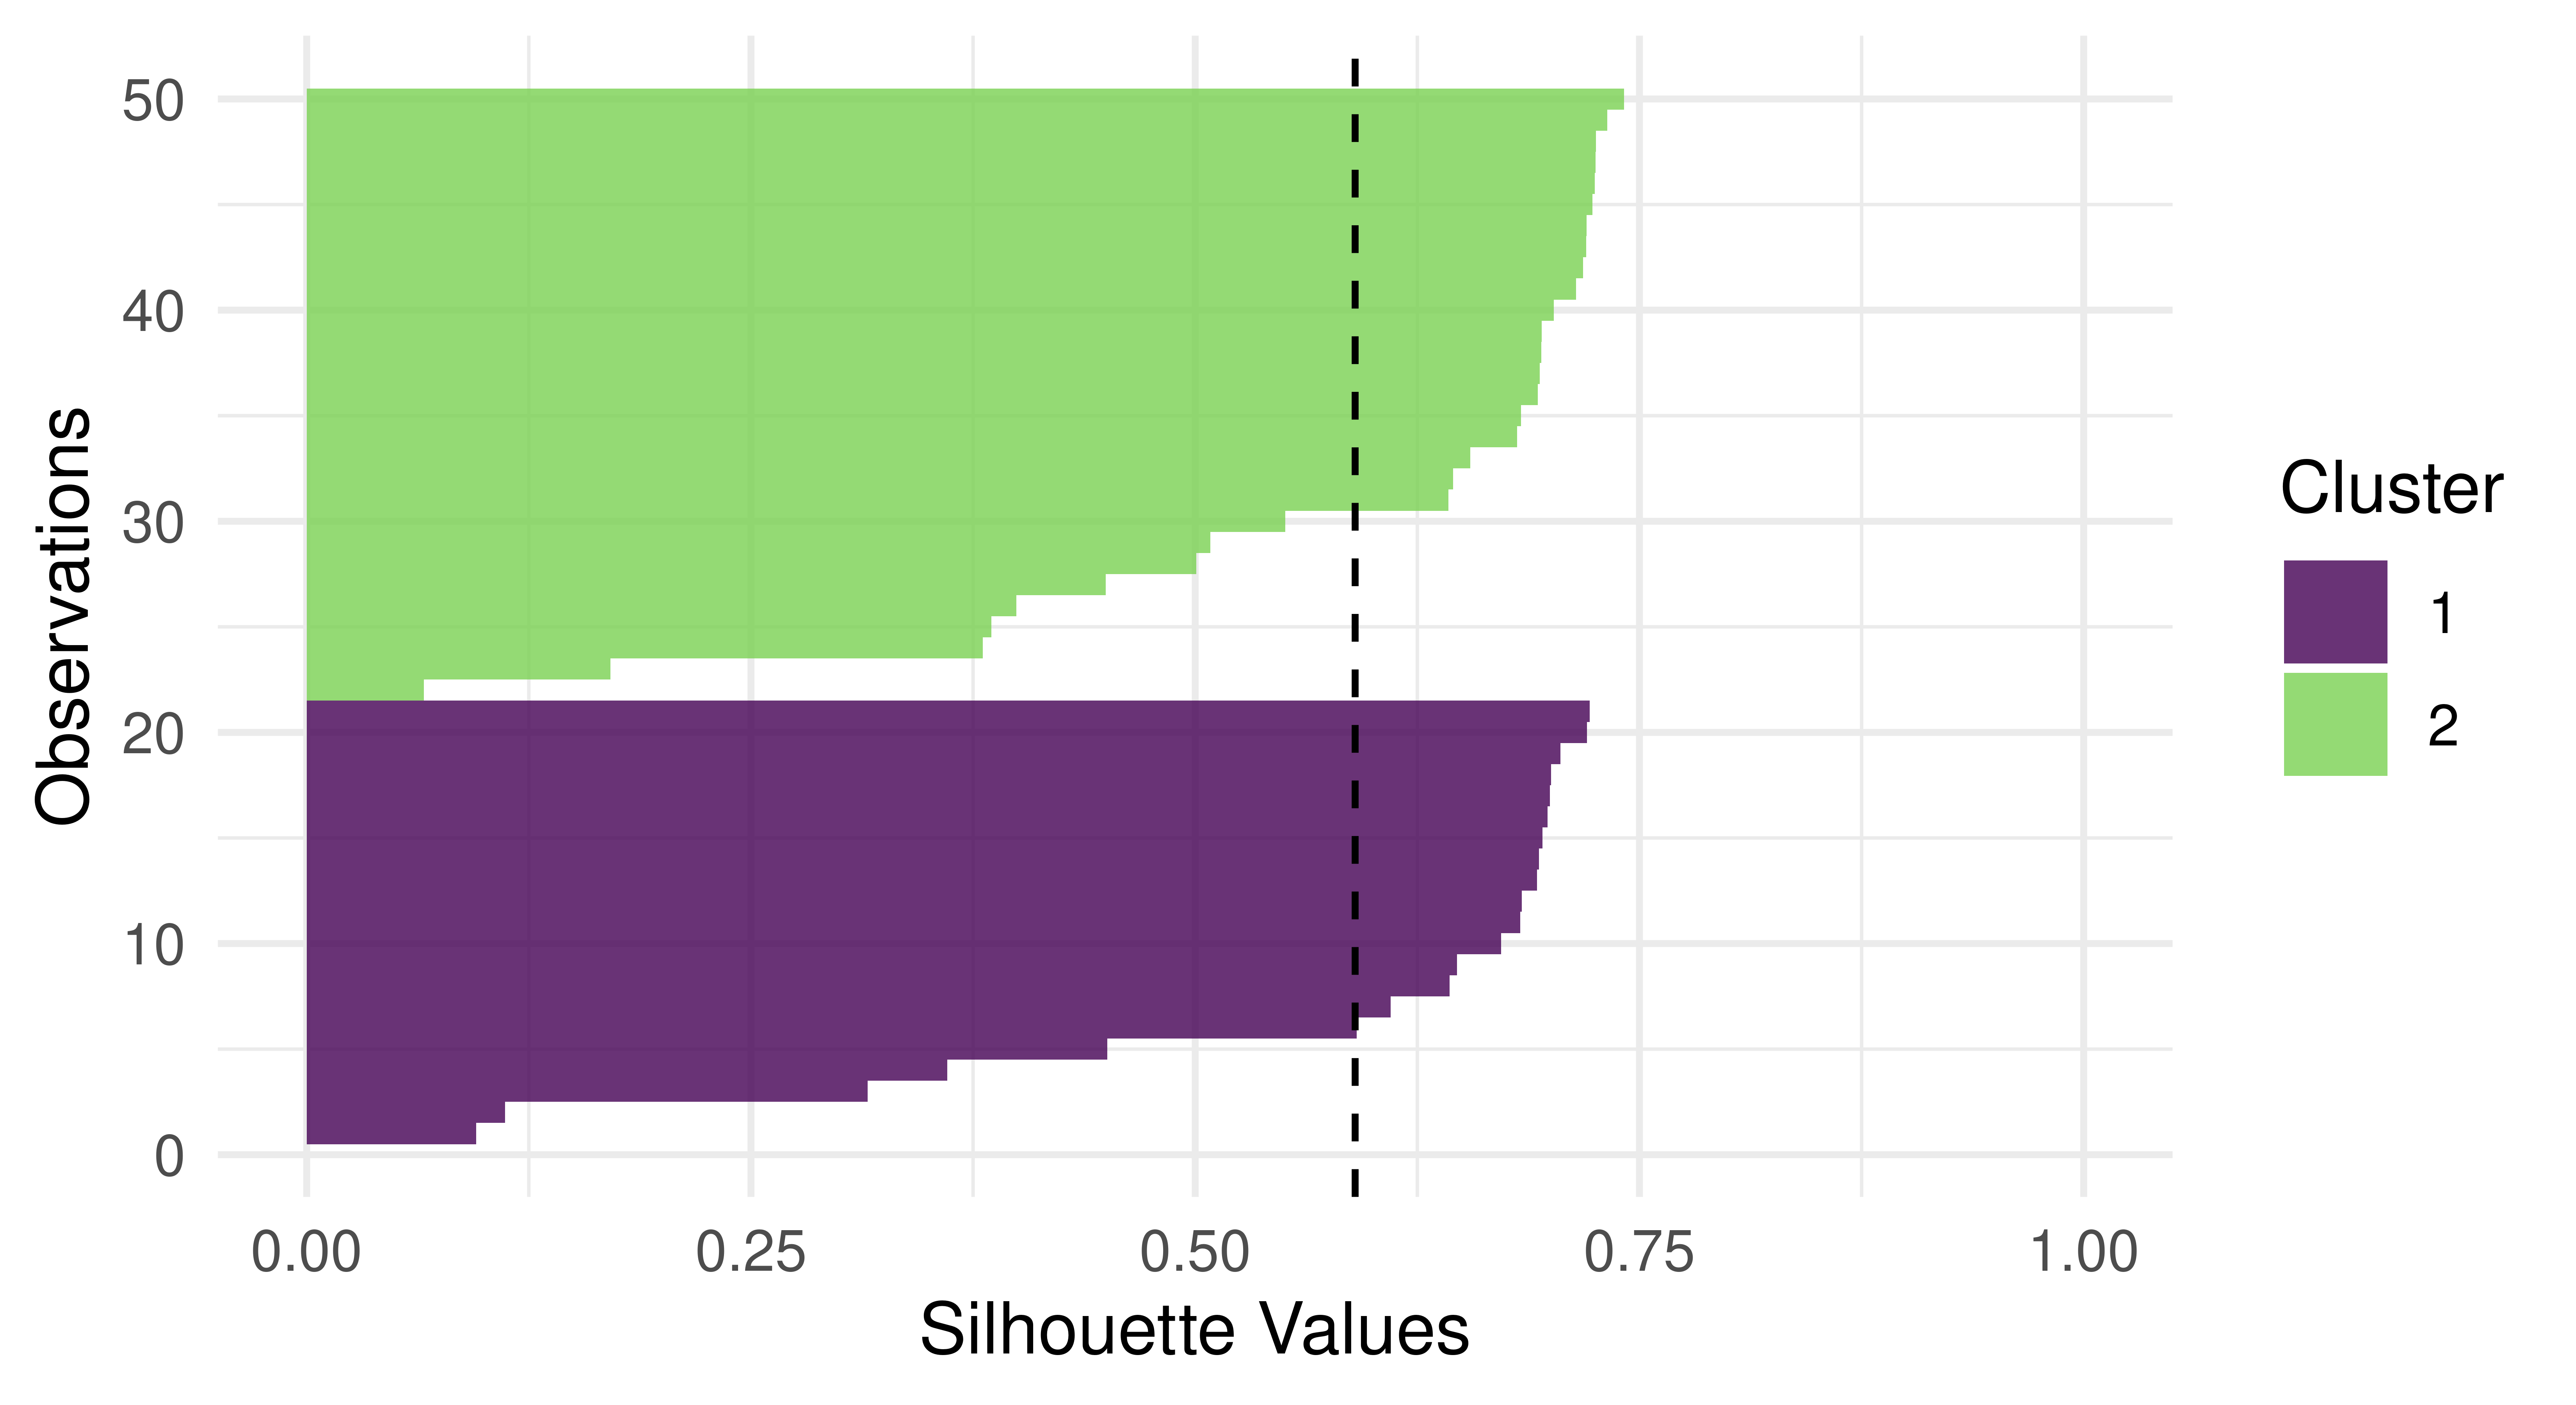 Horizontal barplot with 'Silhouette Values' on x-axis between 0 and 1; y-axis is 'Observations' between 0 and 50. Observations between 0-20 are all colored purple (cluster 1) and observations between 21-50 are colored green (cluster 2). A dashed vertical line passes through x=0.59. The majority of bars finish before this line.